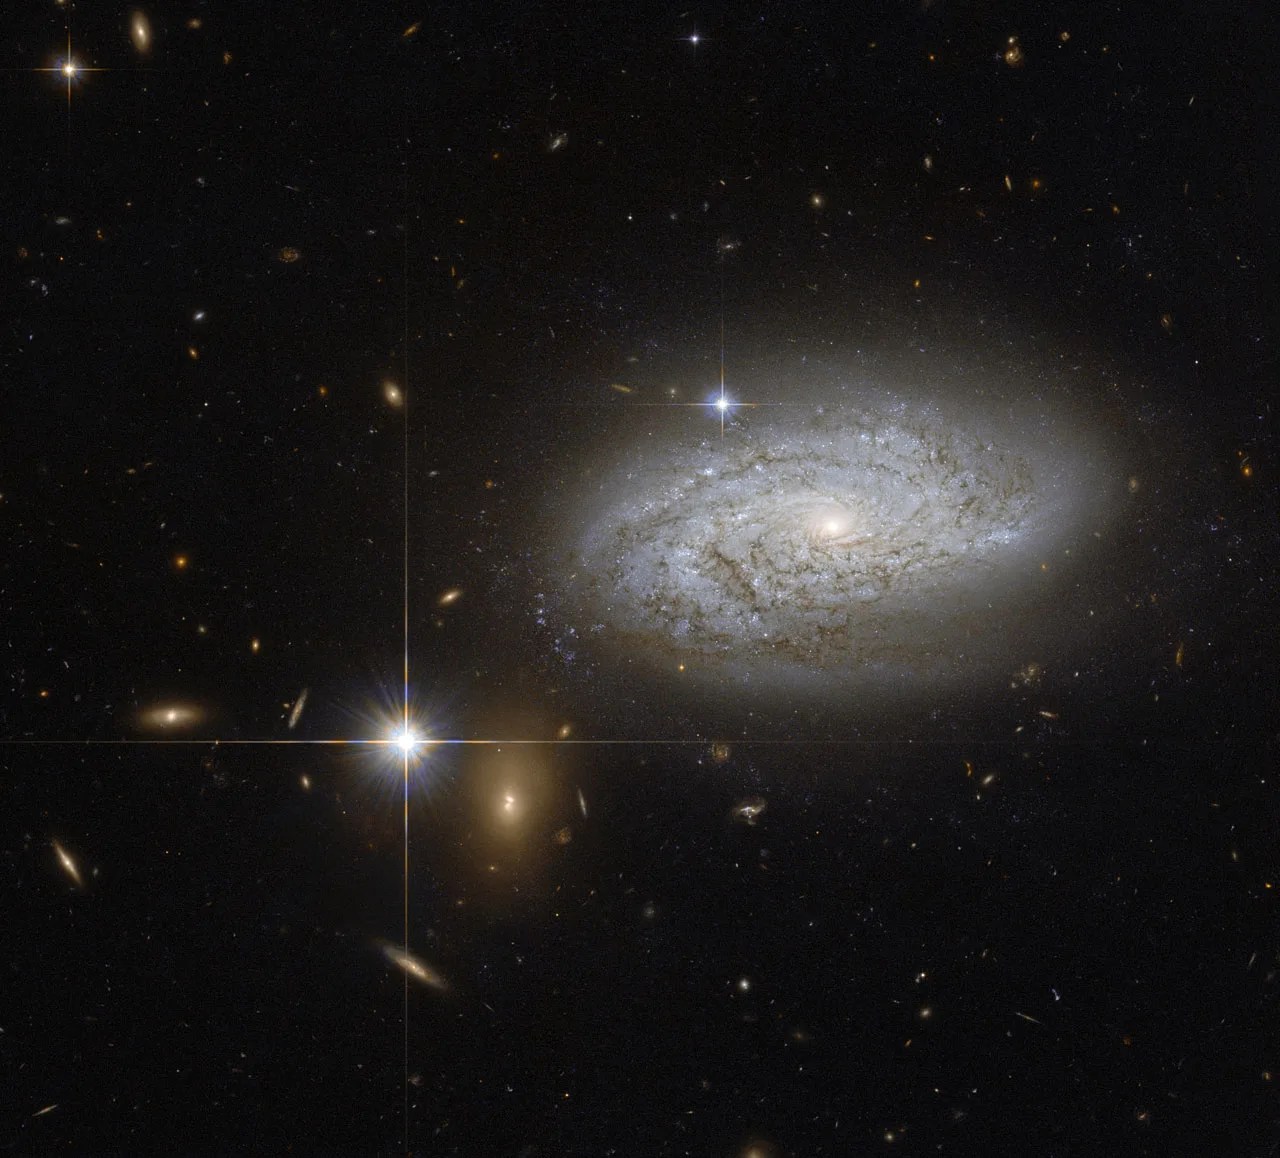 A spiral galaxy appears as a swirl of dust and light on a field of stars, with more galaxies in the background and a bright foreground star visible nearby.